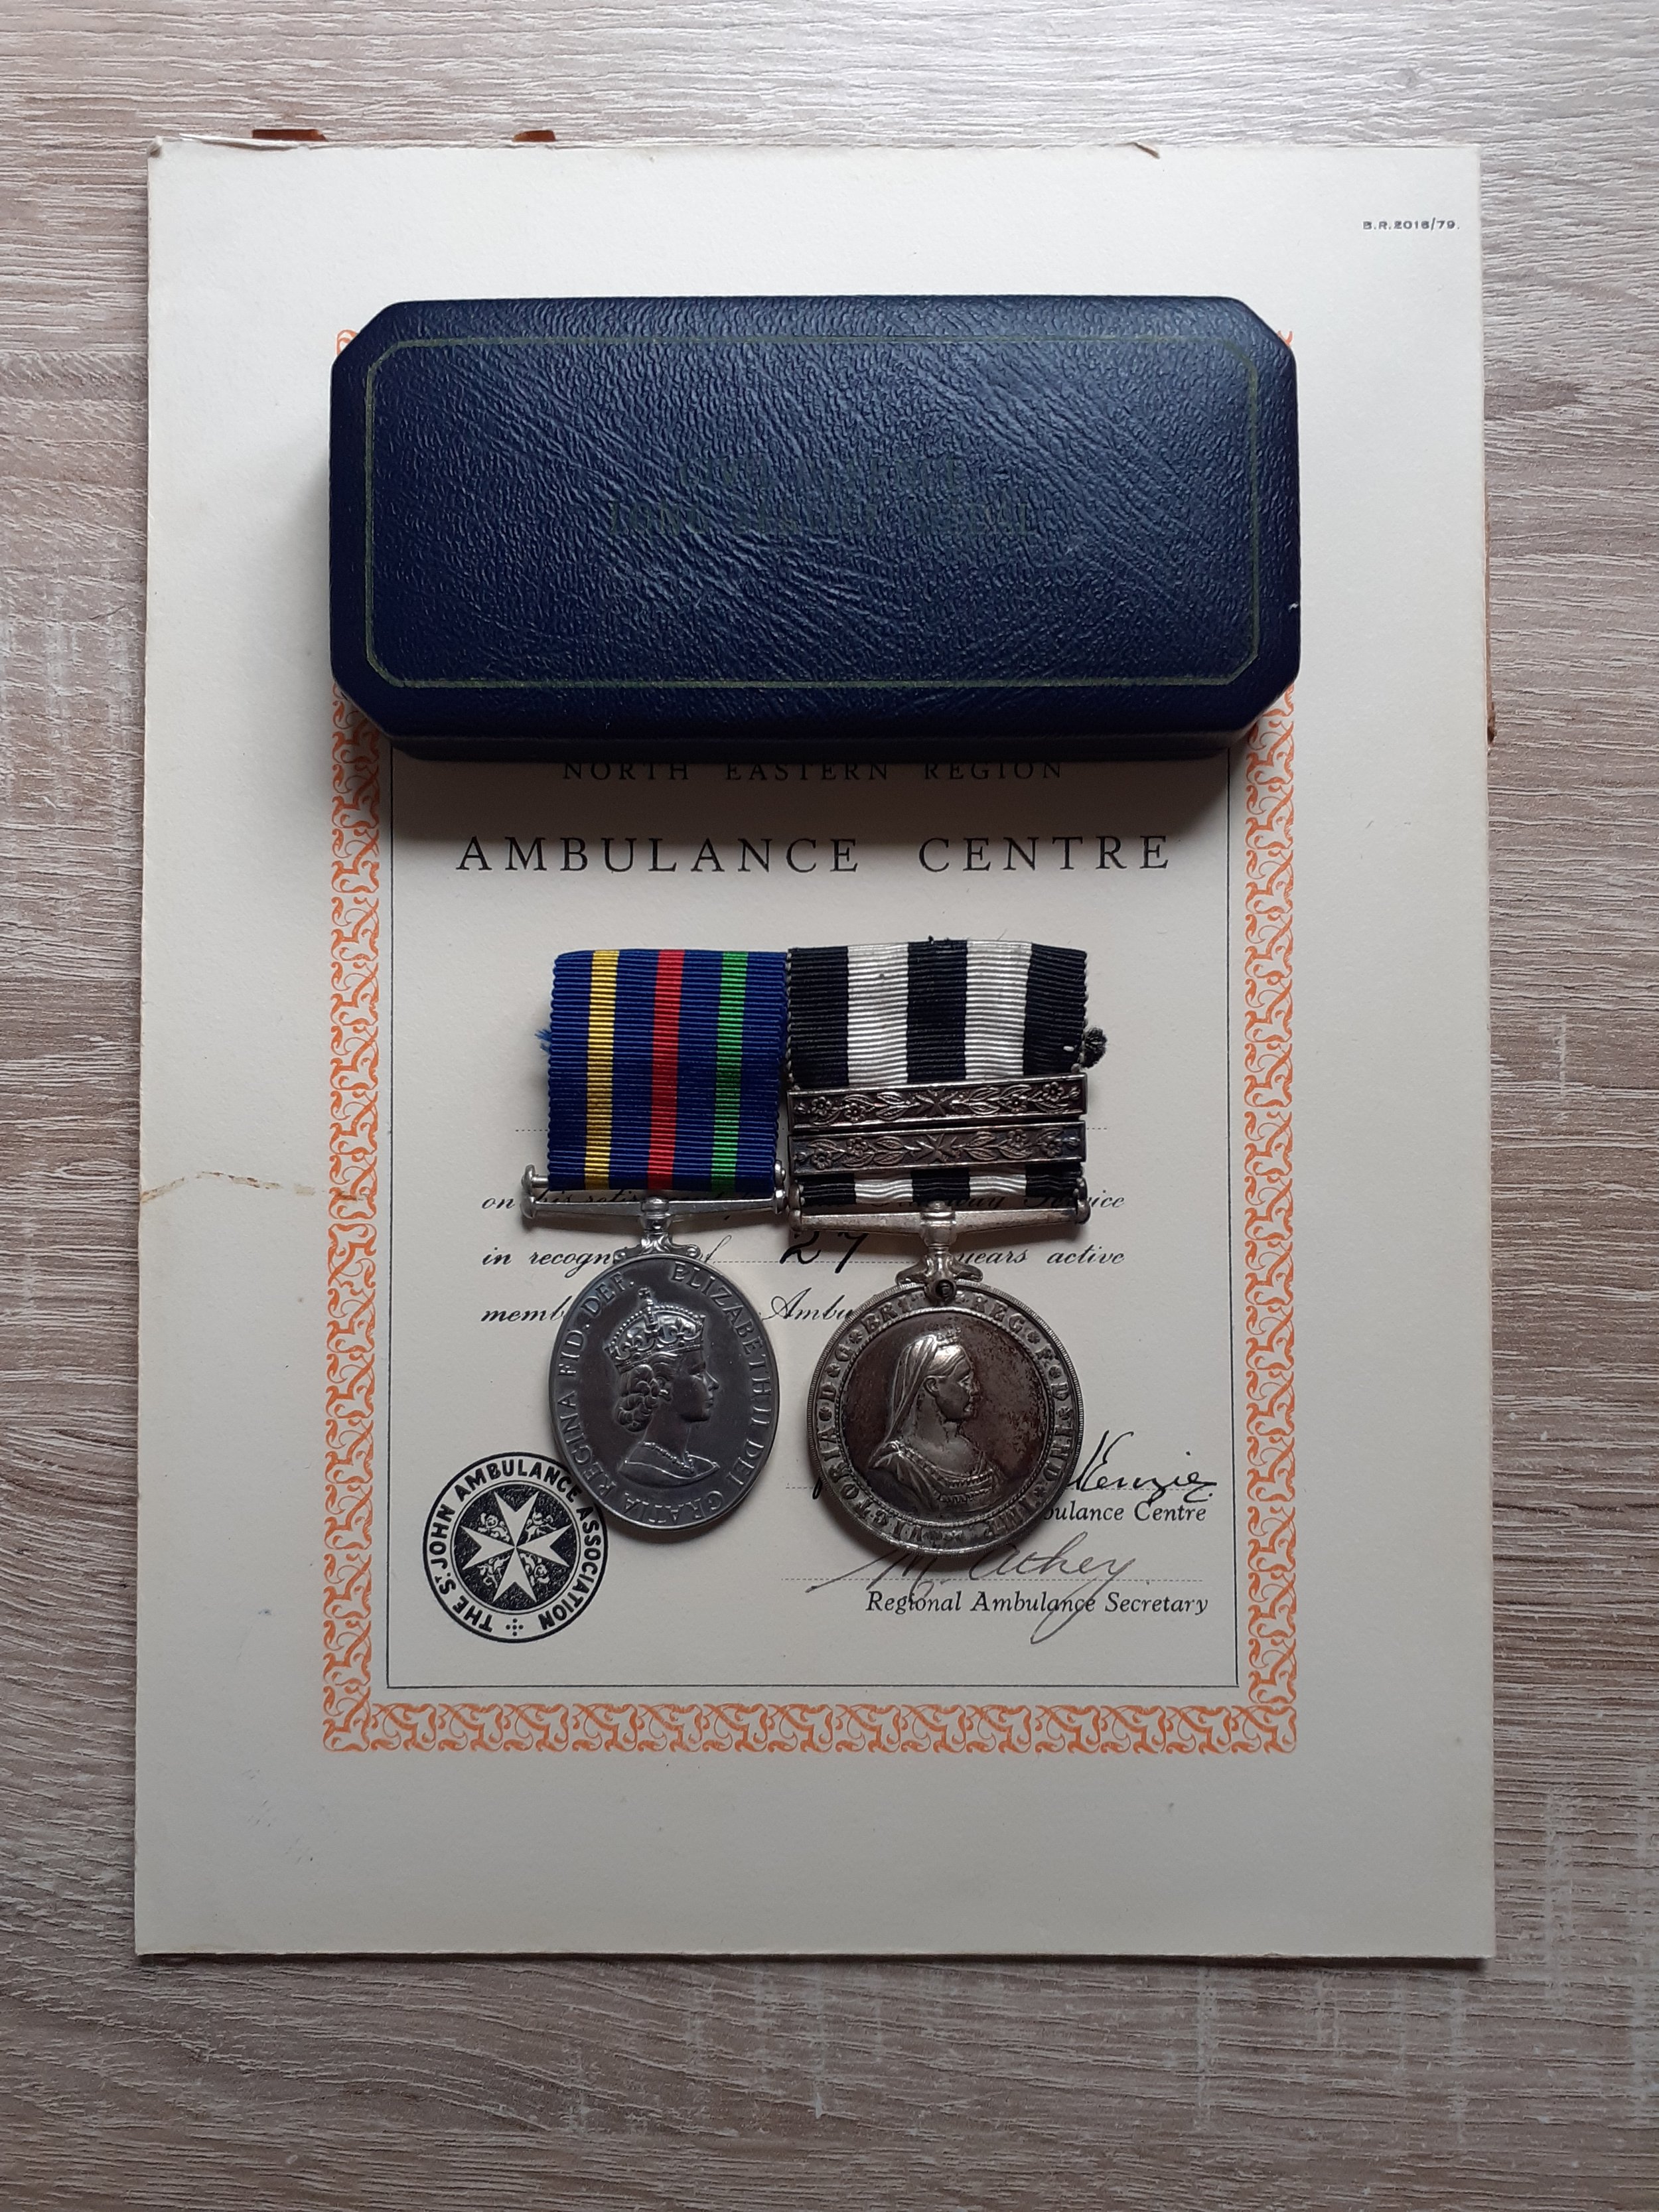 St.Johns Ambulance and Civil Defence Long Service Medals.